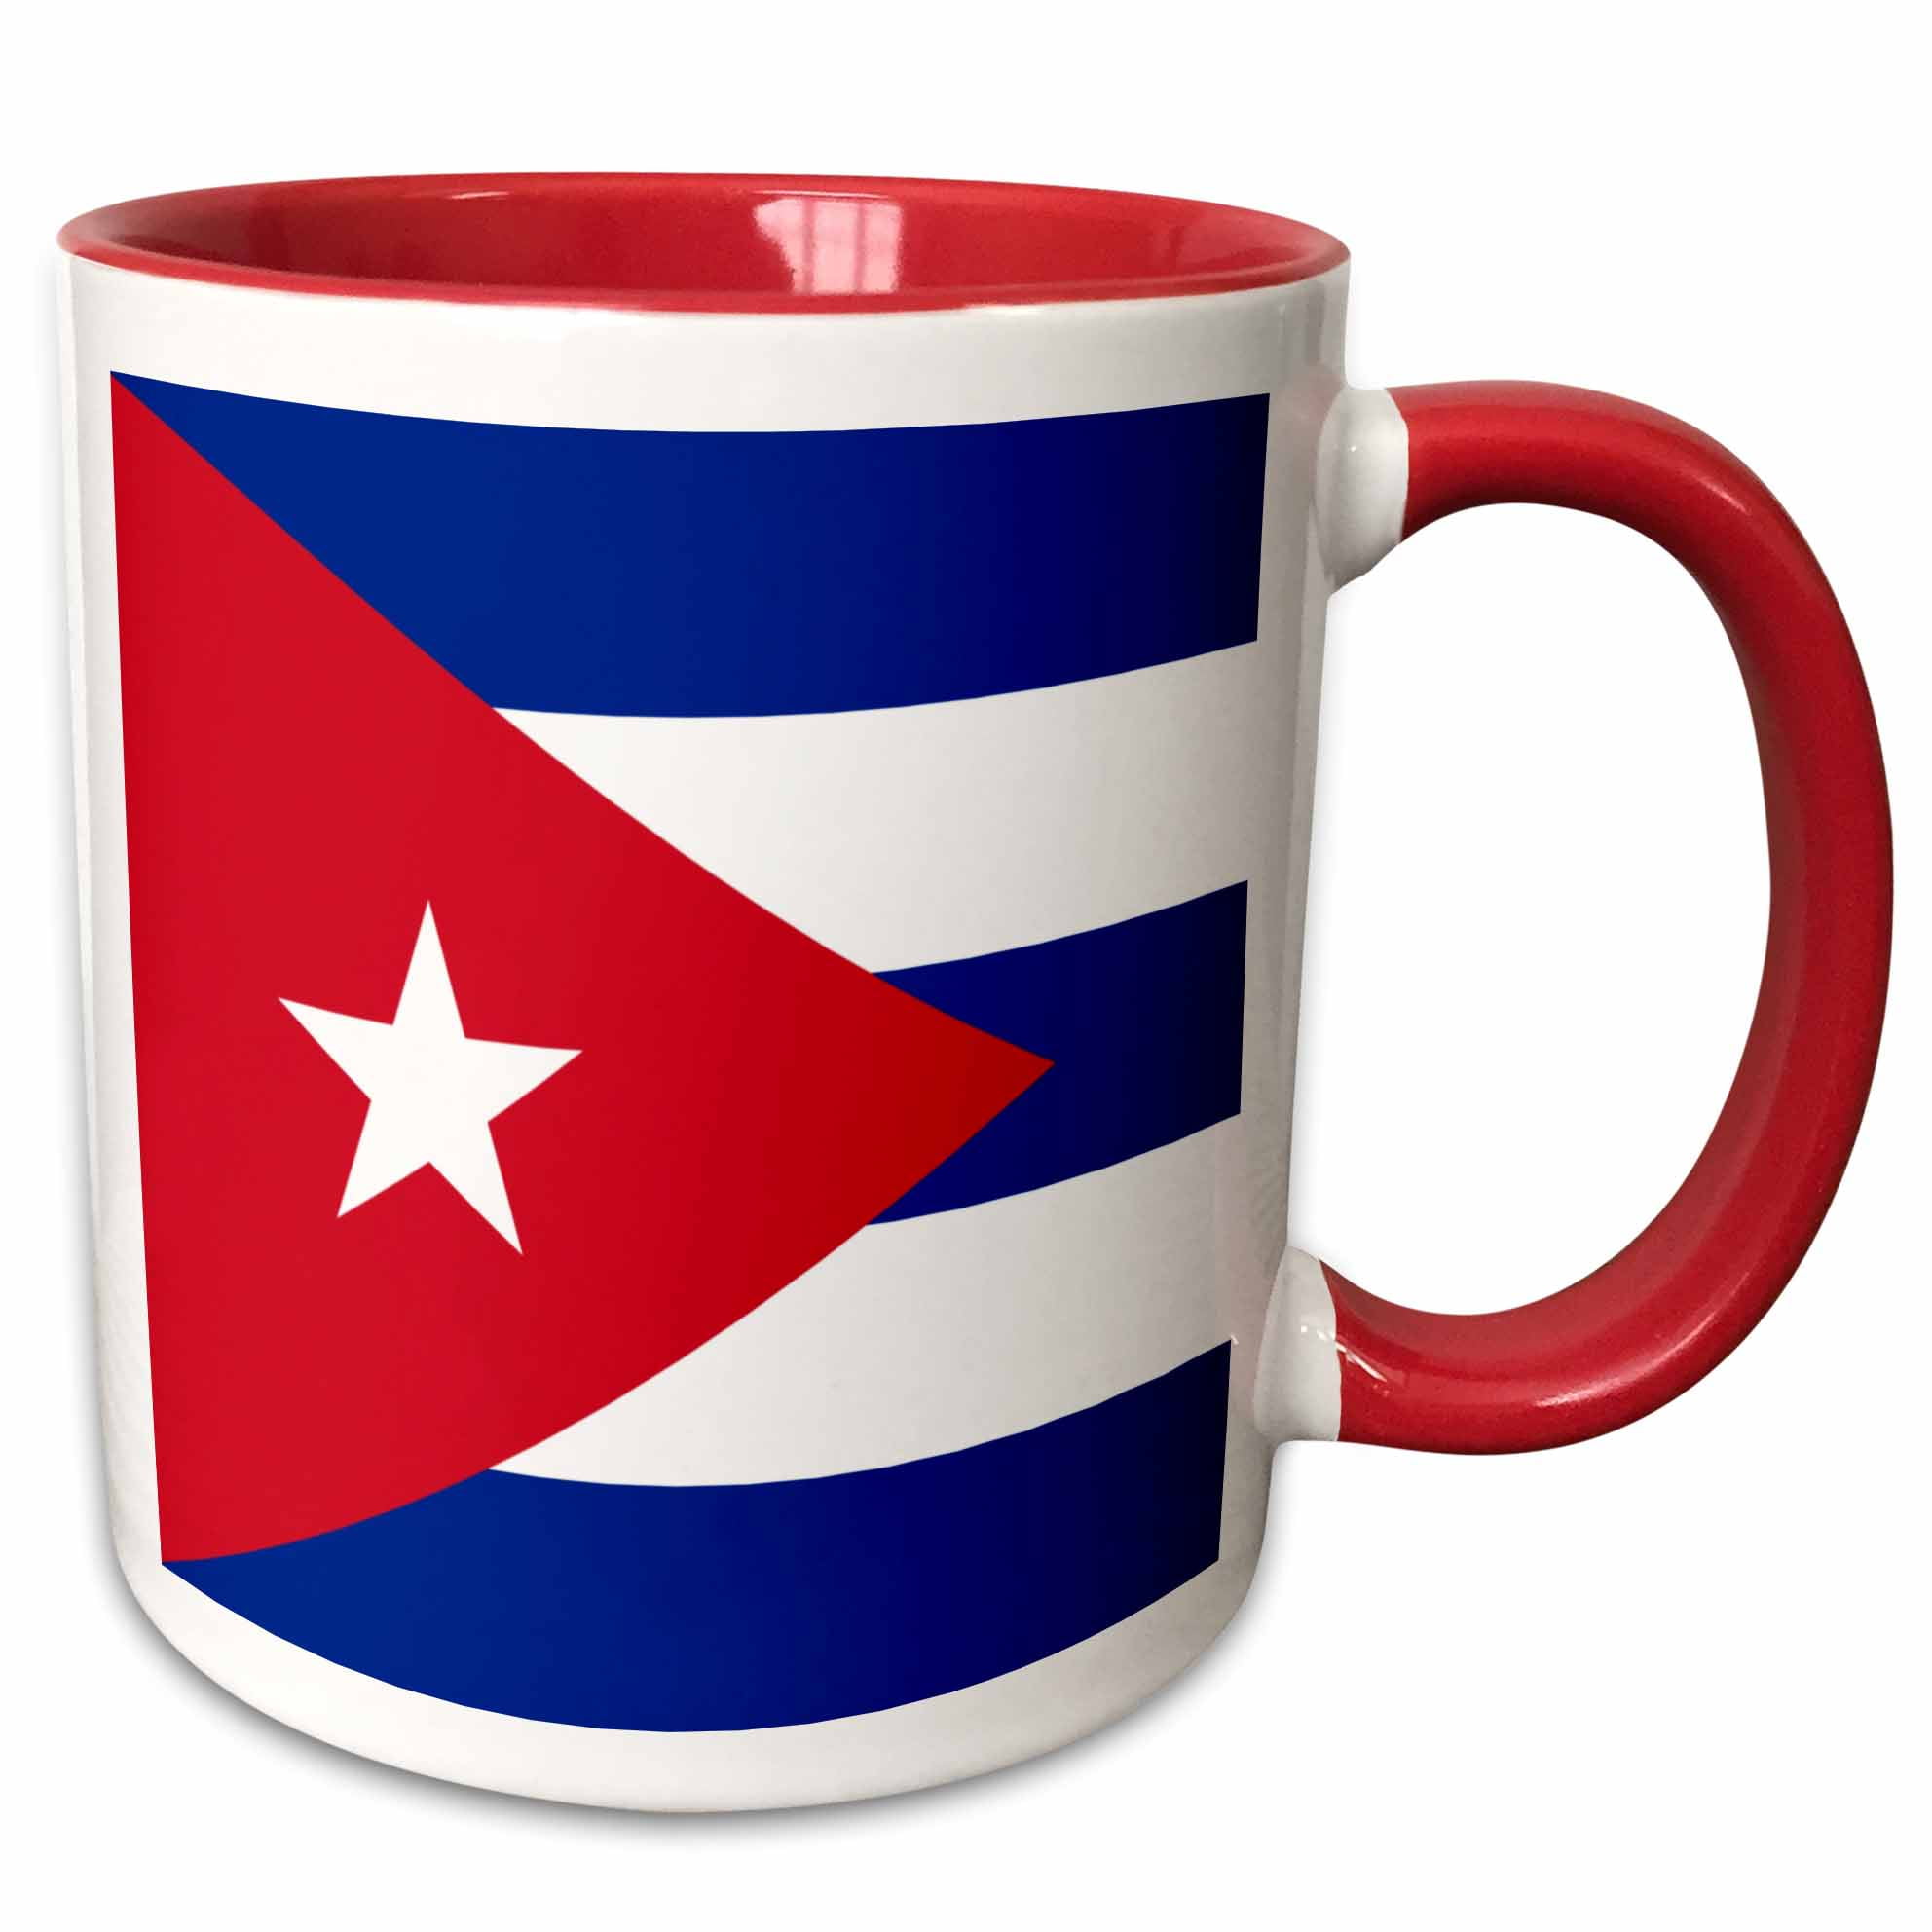 3dRose Flag of Cuba - Cuban blue stripes red triangle white star - Caribbean island country world flags - Two Tone Red - Walmart.com